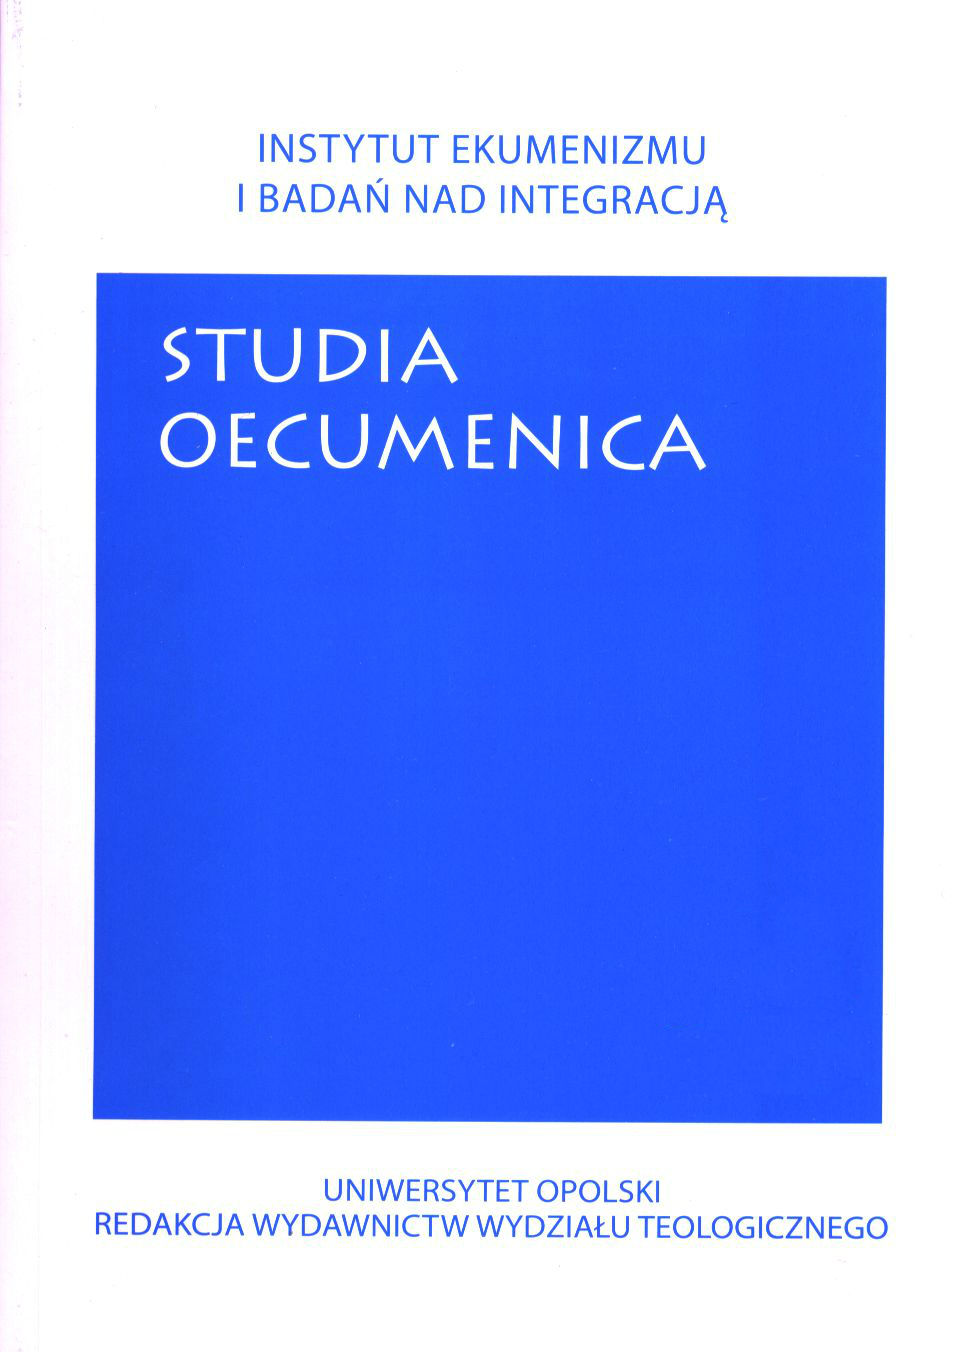 Can the Leuenberg Agreement be Considered as a Contemporary Ecumenical Catechism? Cover Image